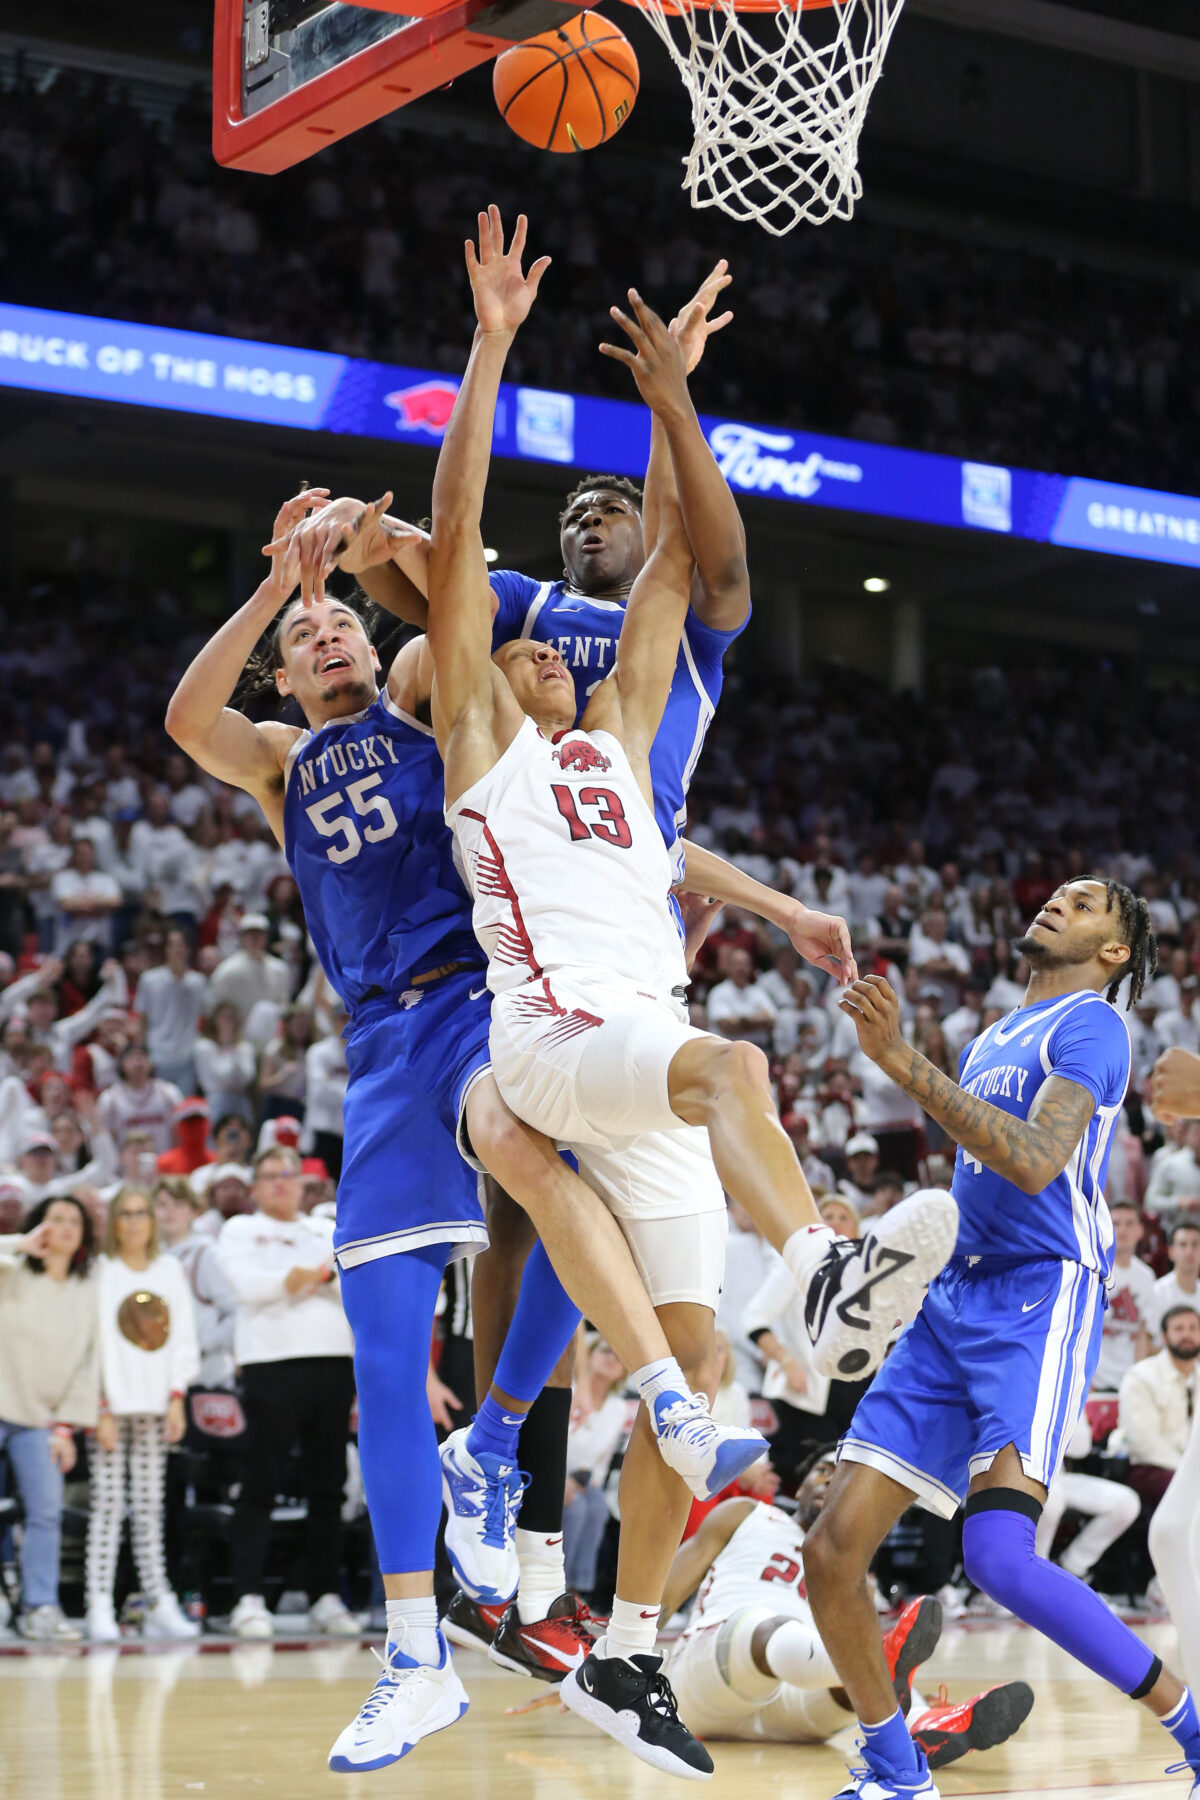 Photo gallery: A chippy and emotional Arkansas game against Kentucky